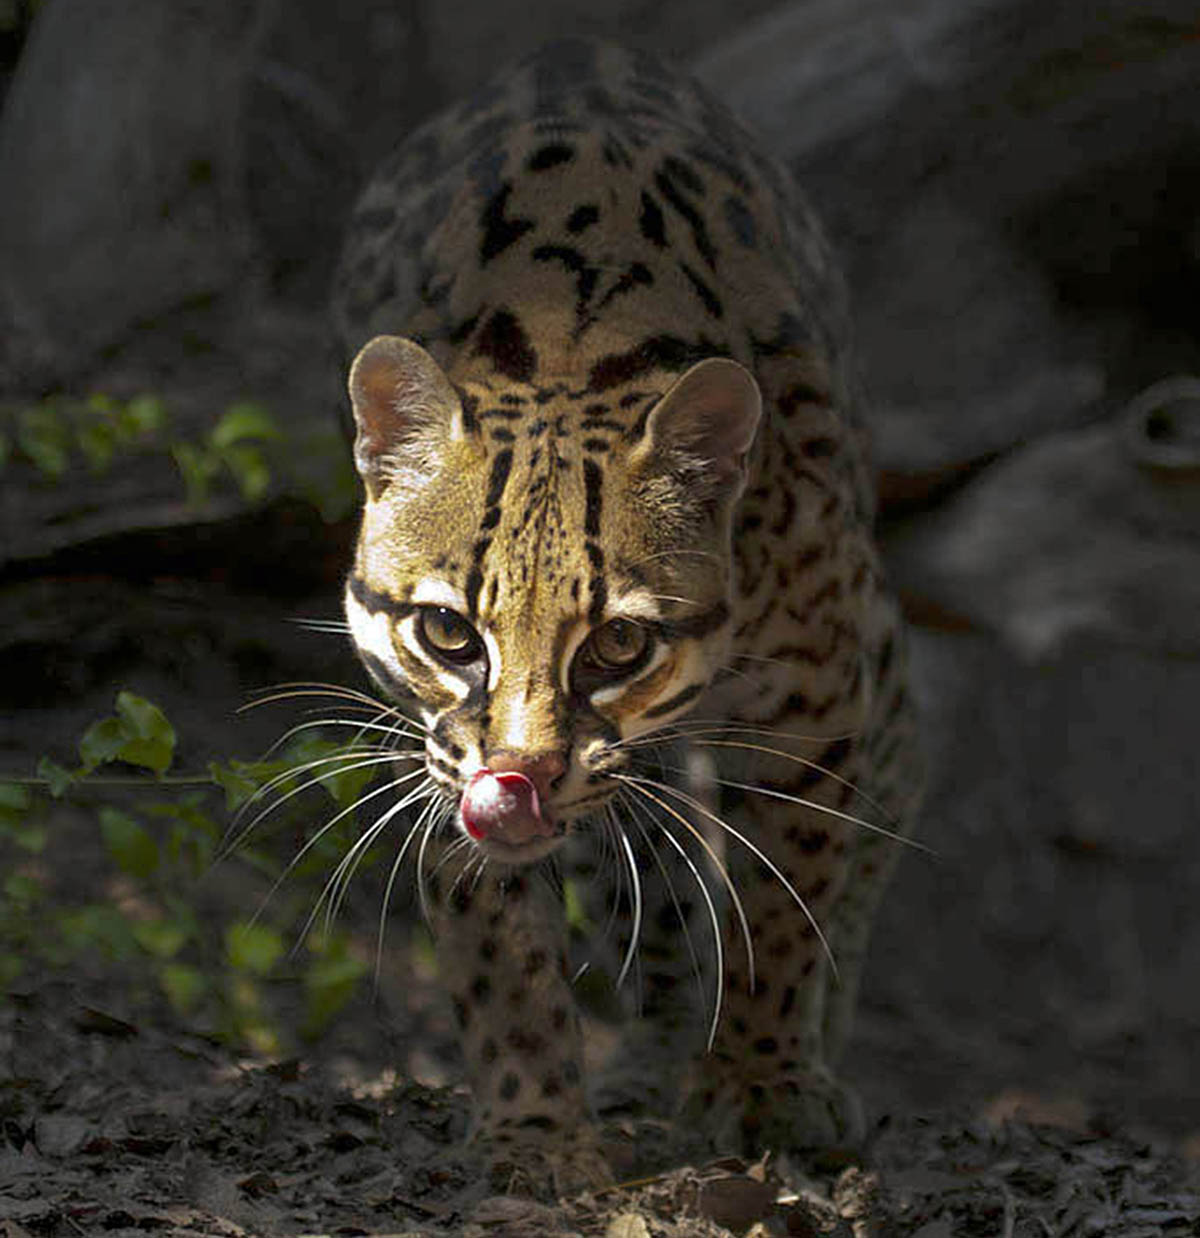 Photo of an adult ocelot in the wild, as captured by photographer Larry Ditto.